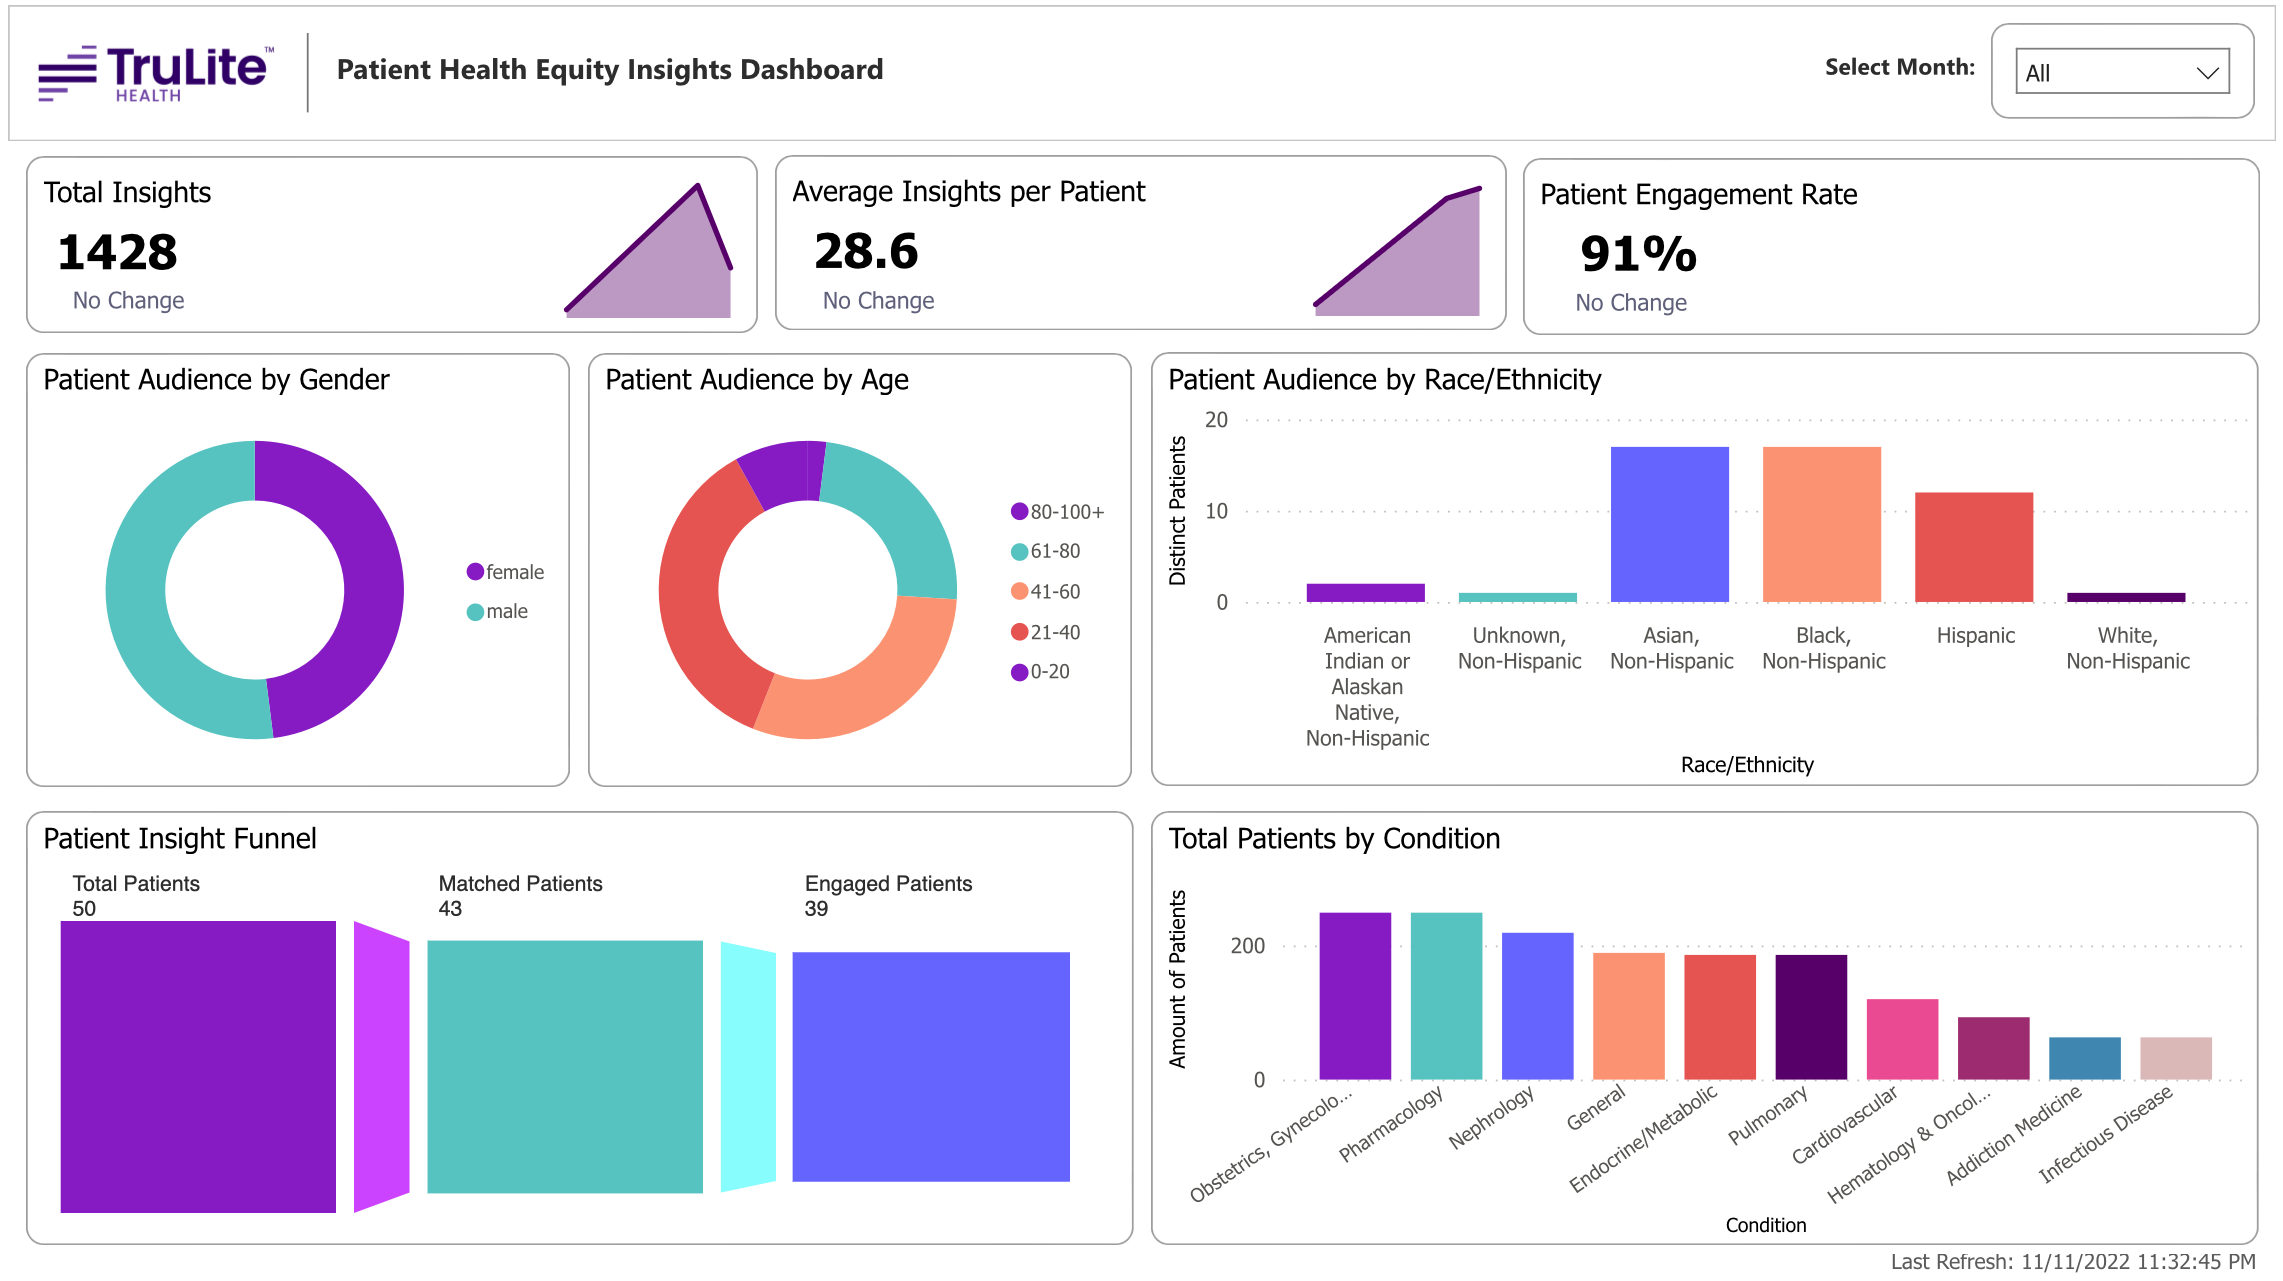 Patient Health Equity Insights Dashboard